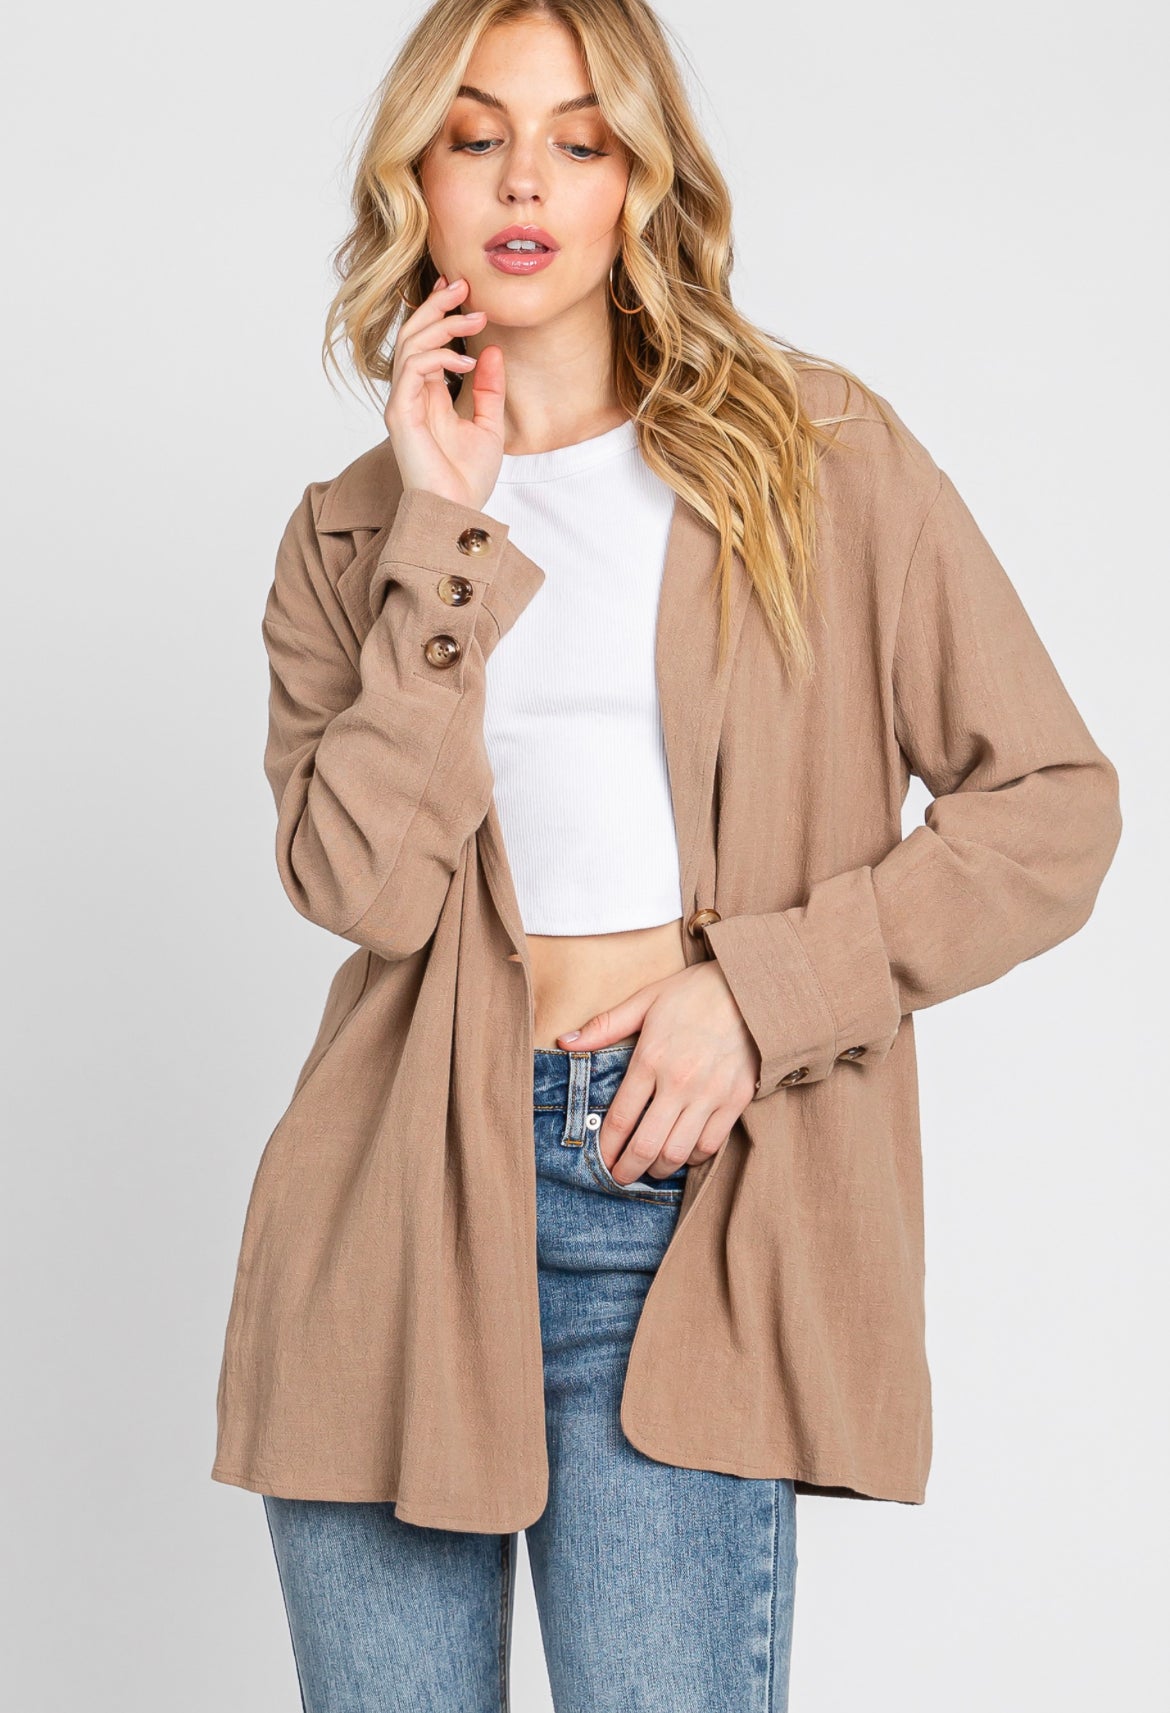 Tofee relaxed blazer